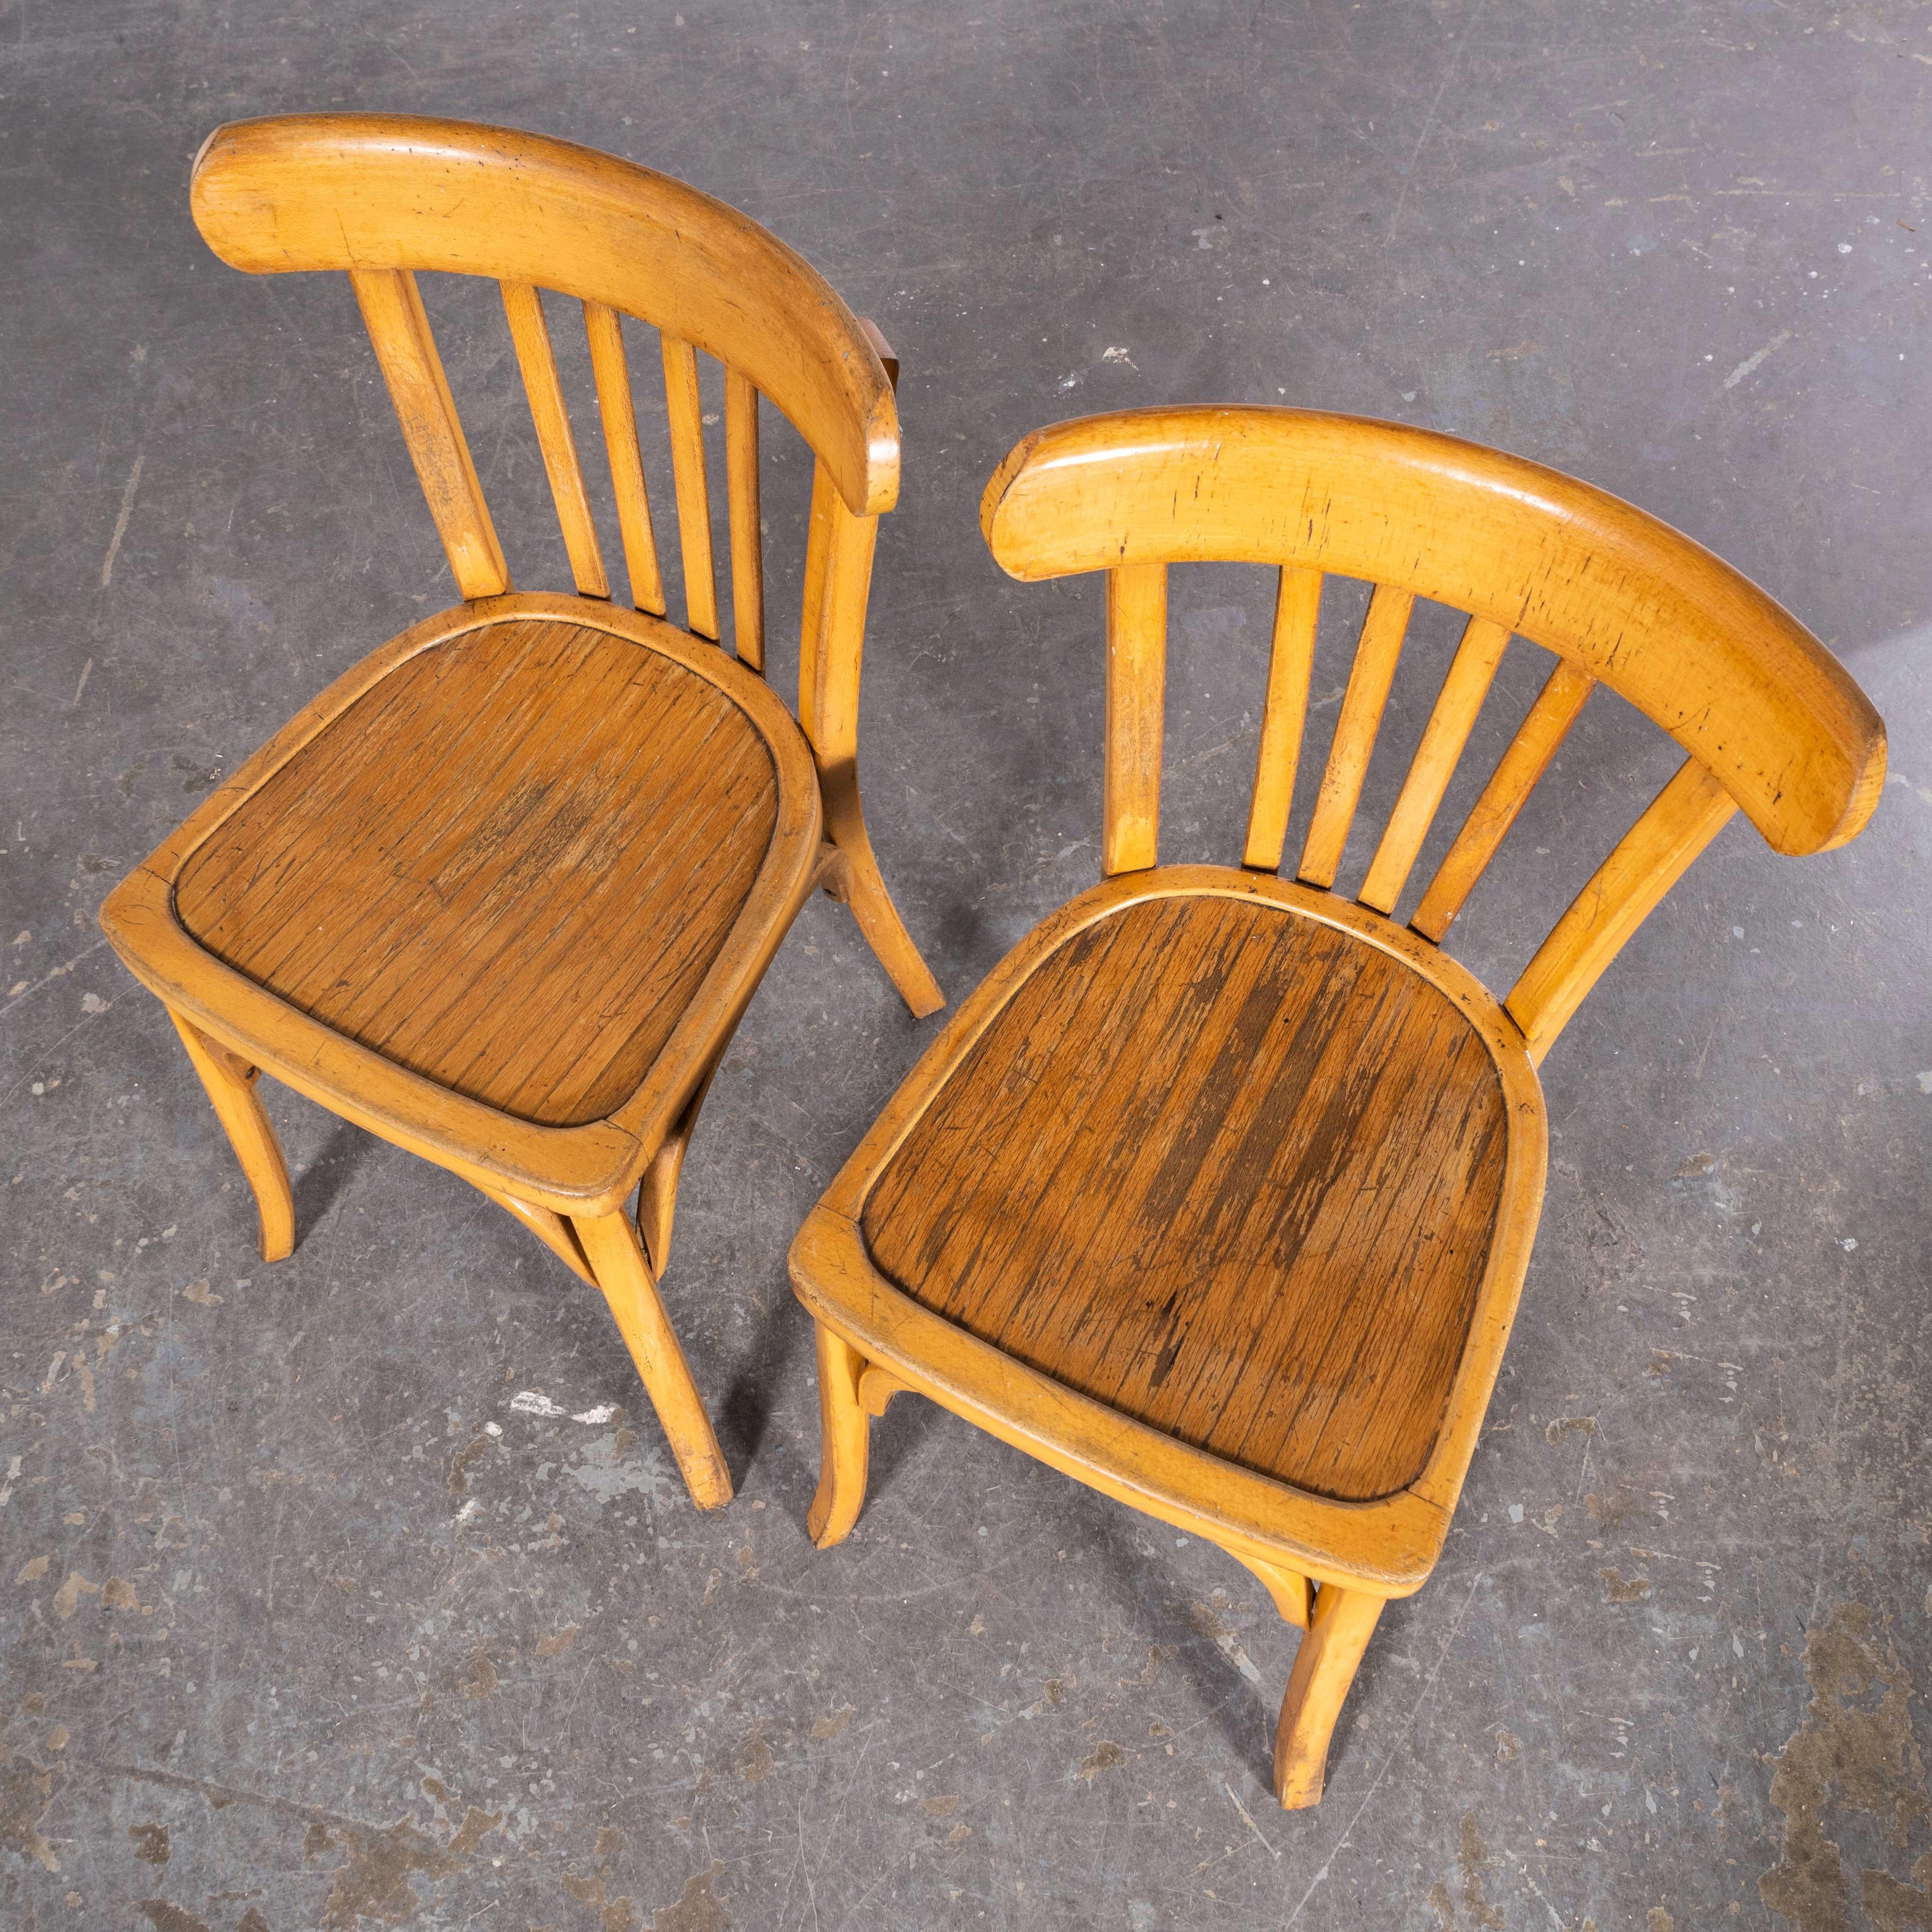 1950s Luterma Blonde Oak Bentwood Dining Chair - Set of Pair In Good Condition For Sale In Hook, Hampshire